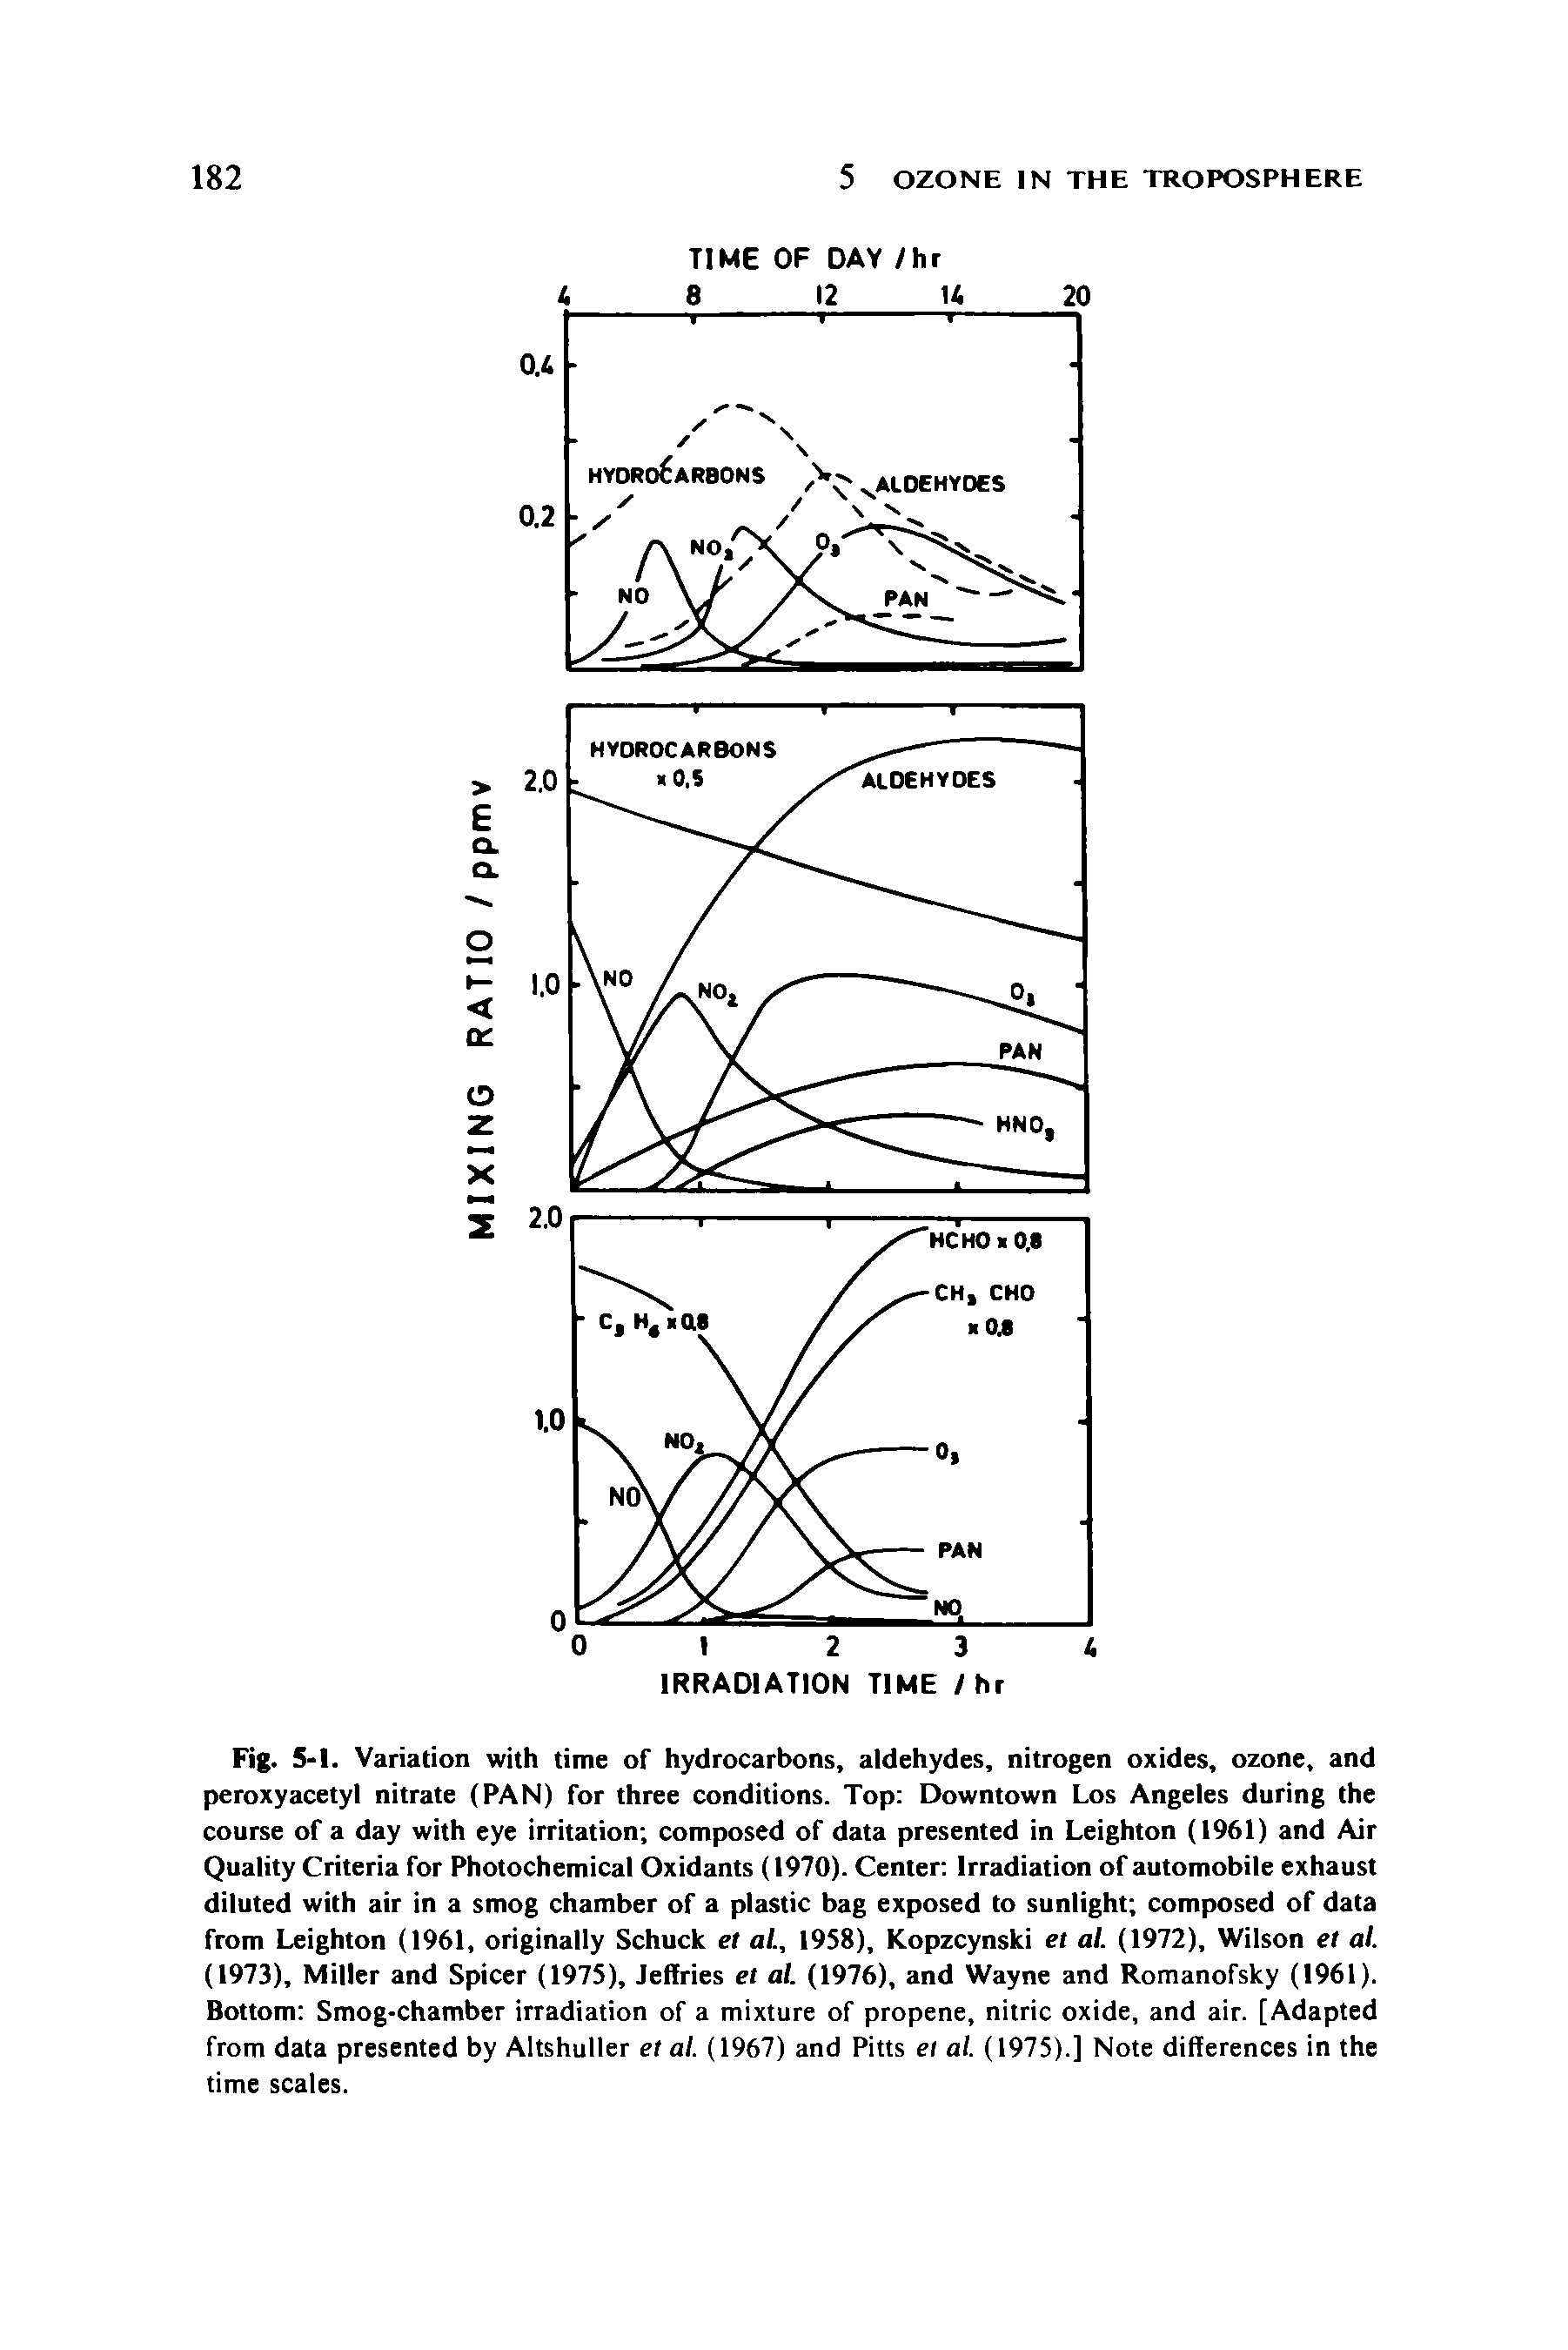 Fig. 5-1. Variation with time of hydrocarbons, aldehydes, nitrogen oxides, ozone, and peroxyacetyl nitrate (PAN) for three conditions. Top Downtown Los Angeles during the course of a day with eye irritation composed of data presented in Leighton (1961) and Air Quality Criteria for Photochemical Oxidants (1970). Center Irradiation of automobile exhaust diluted with air in a smog chamber of a plastic bag exposed to sunlight composed of data from Leighton (1961, originally Schuck et al., 1958), Kopzcynski et al. (1972), Wilson et al. (1973), Miller and Spicer (1975), Jeffries et al. (1976), and Wayne and Romanofsky (1961). Bottom Smog-chamber irradiation of a mixture of propene, nitric oxide, and air. [Adapted from data presented by Altshuller et al. (1967) and Pitts el al. (1975).] Note differences in the time scales.